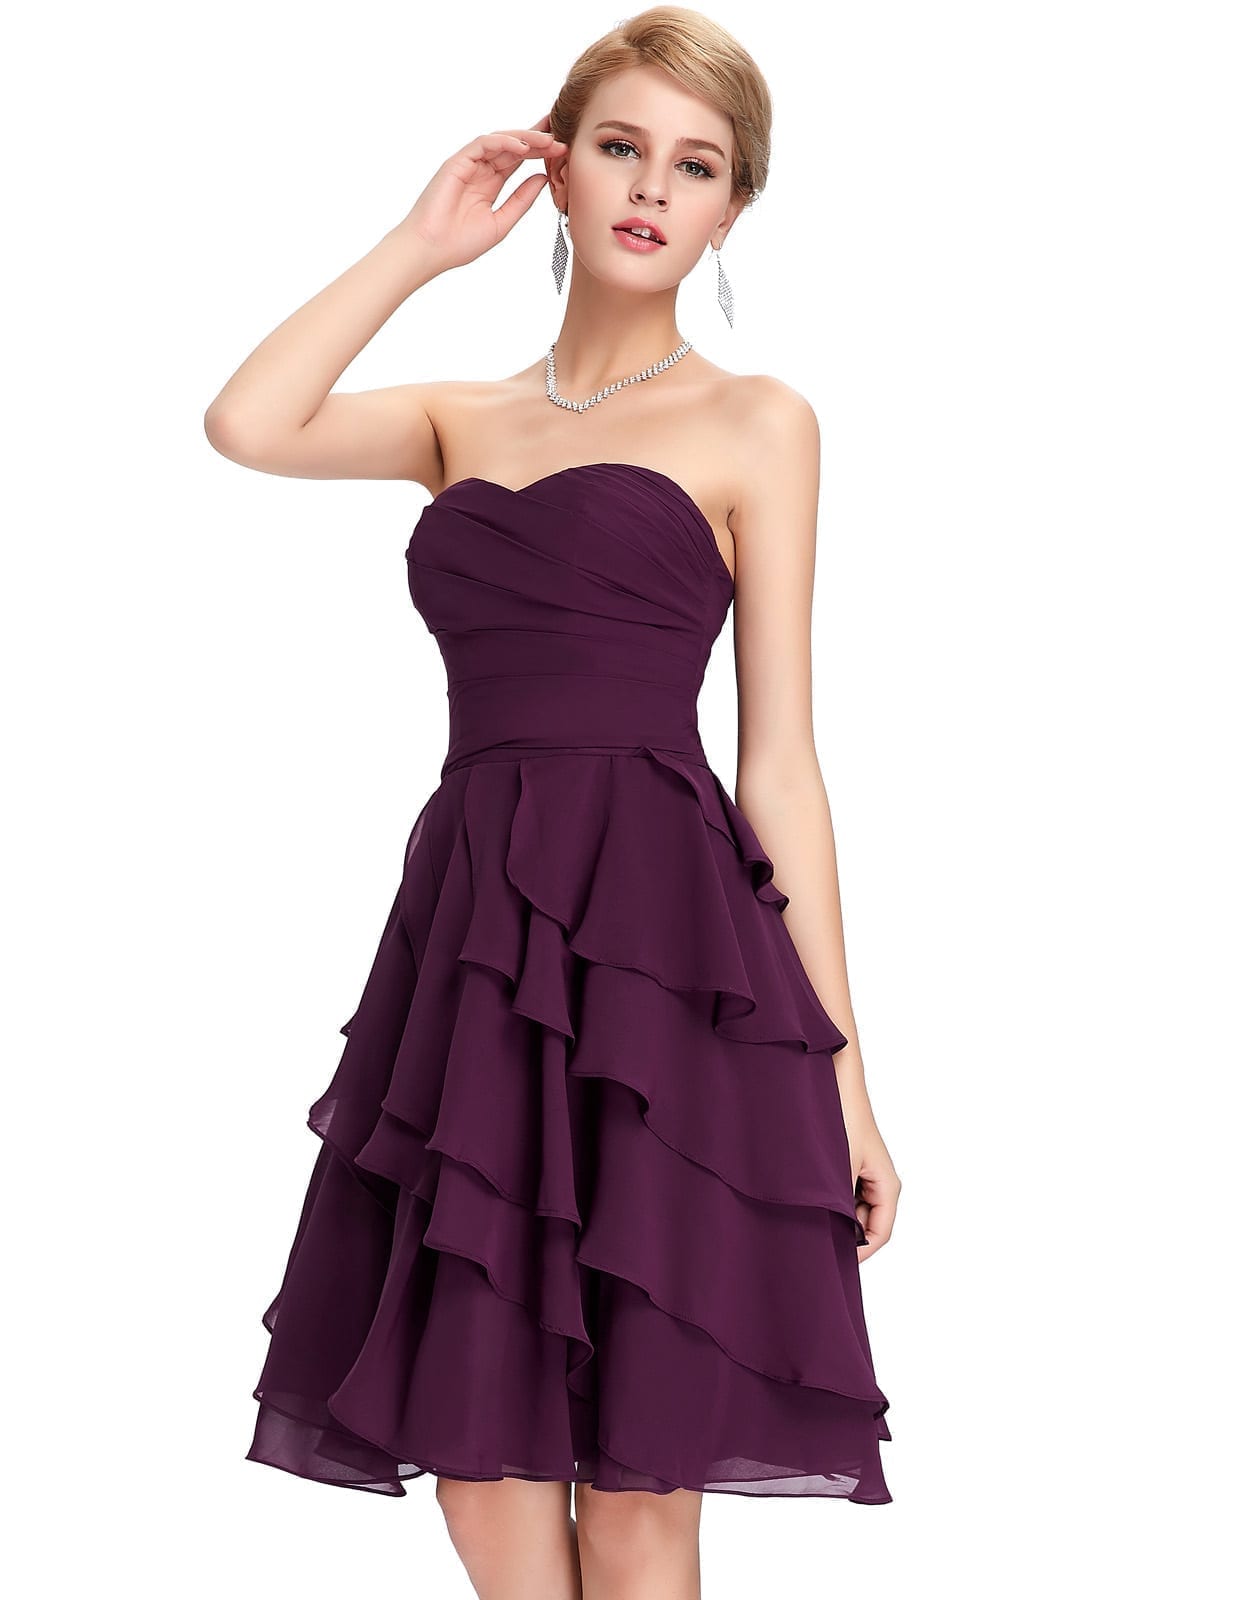  Purple Dresses To Wear To A Wedding in the world The ultimate guide 